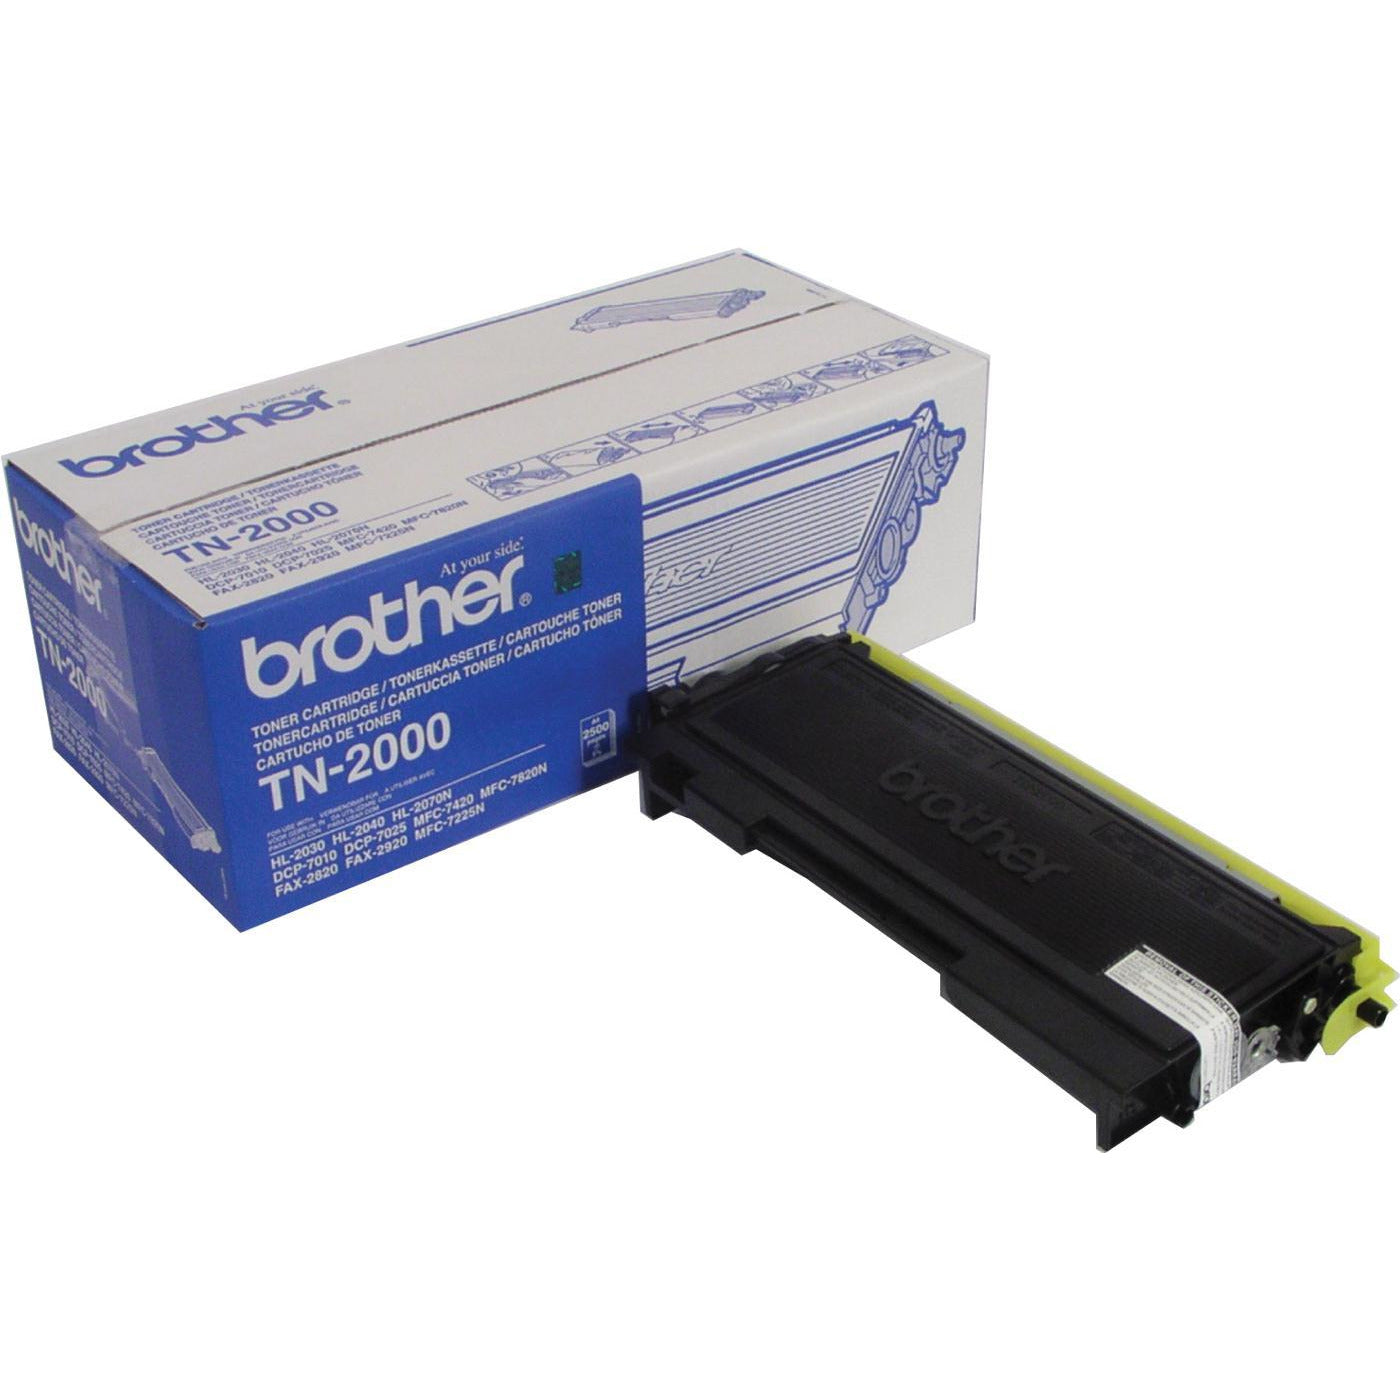 Brother TN-2000 (Yield: 2,500 Pages) Black Toner Cartridge